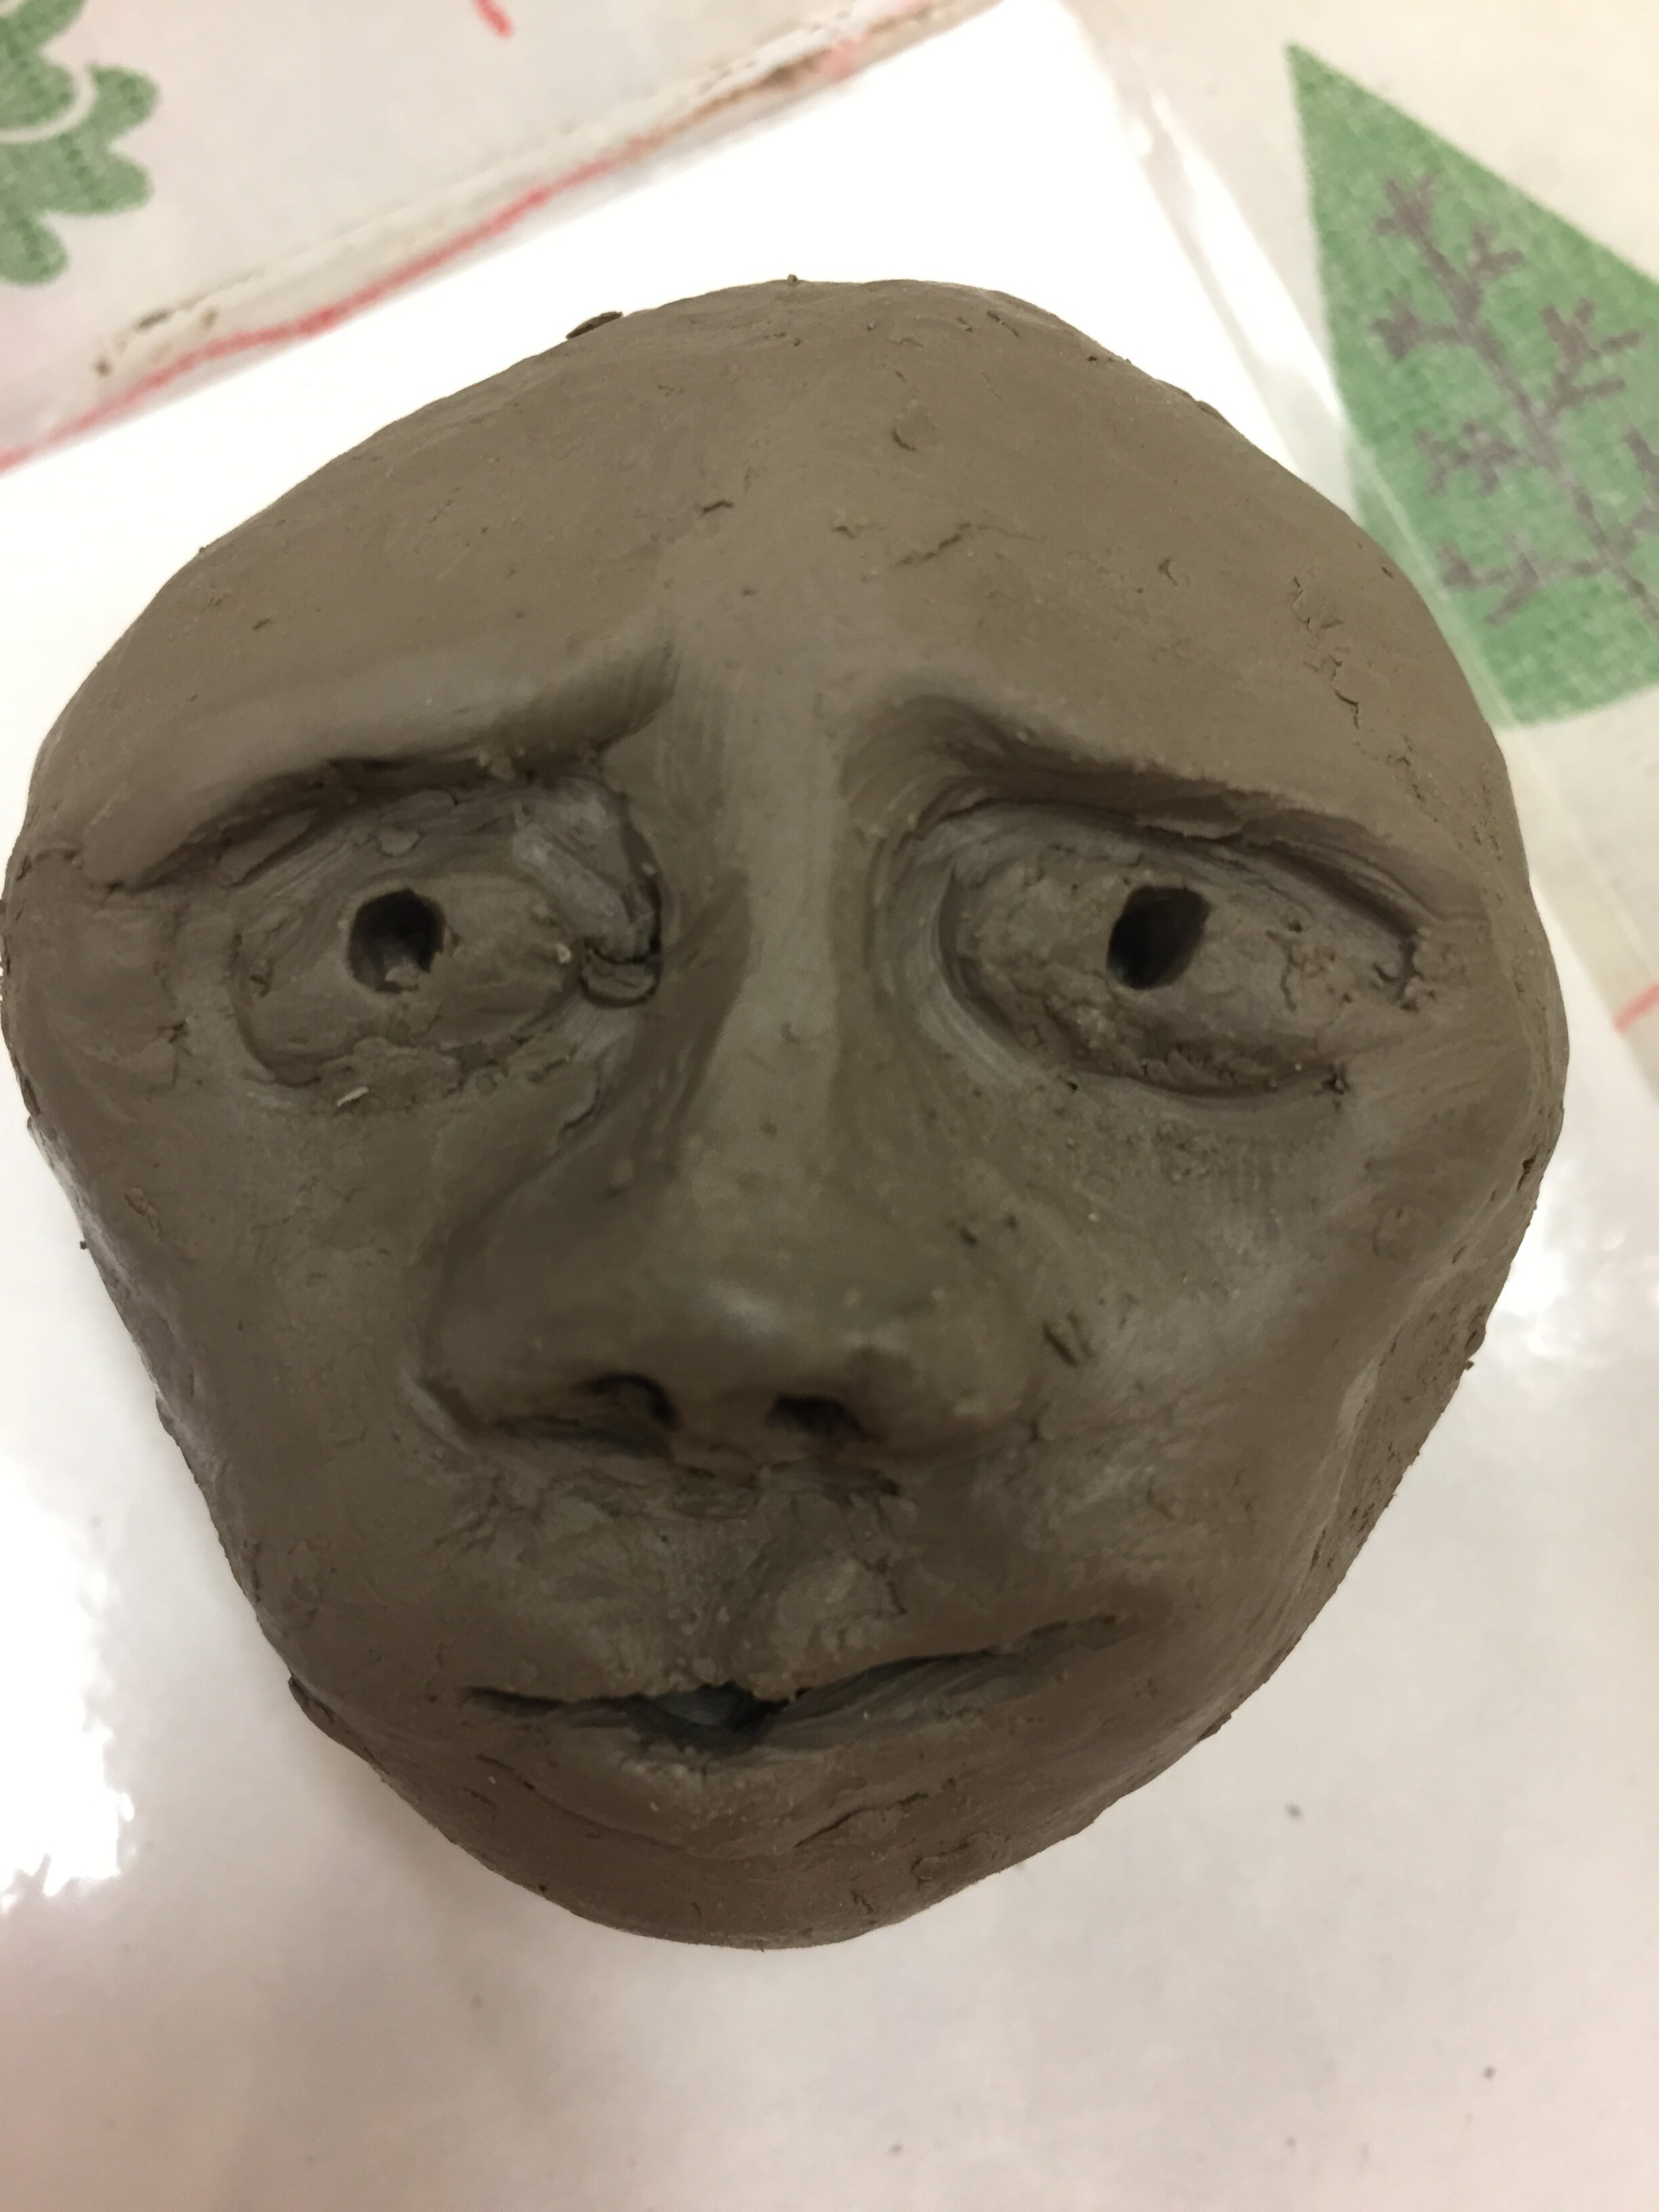 Professional Development Activity Away Day, Perth, Drawing and Clay, Sadness Facial Expression